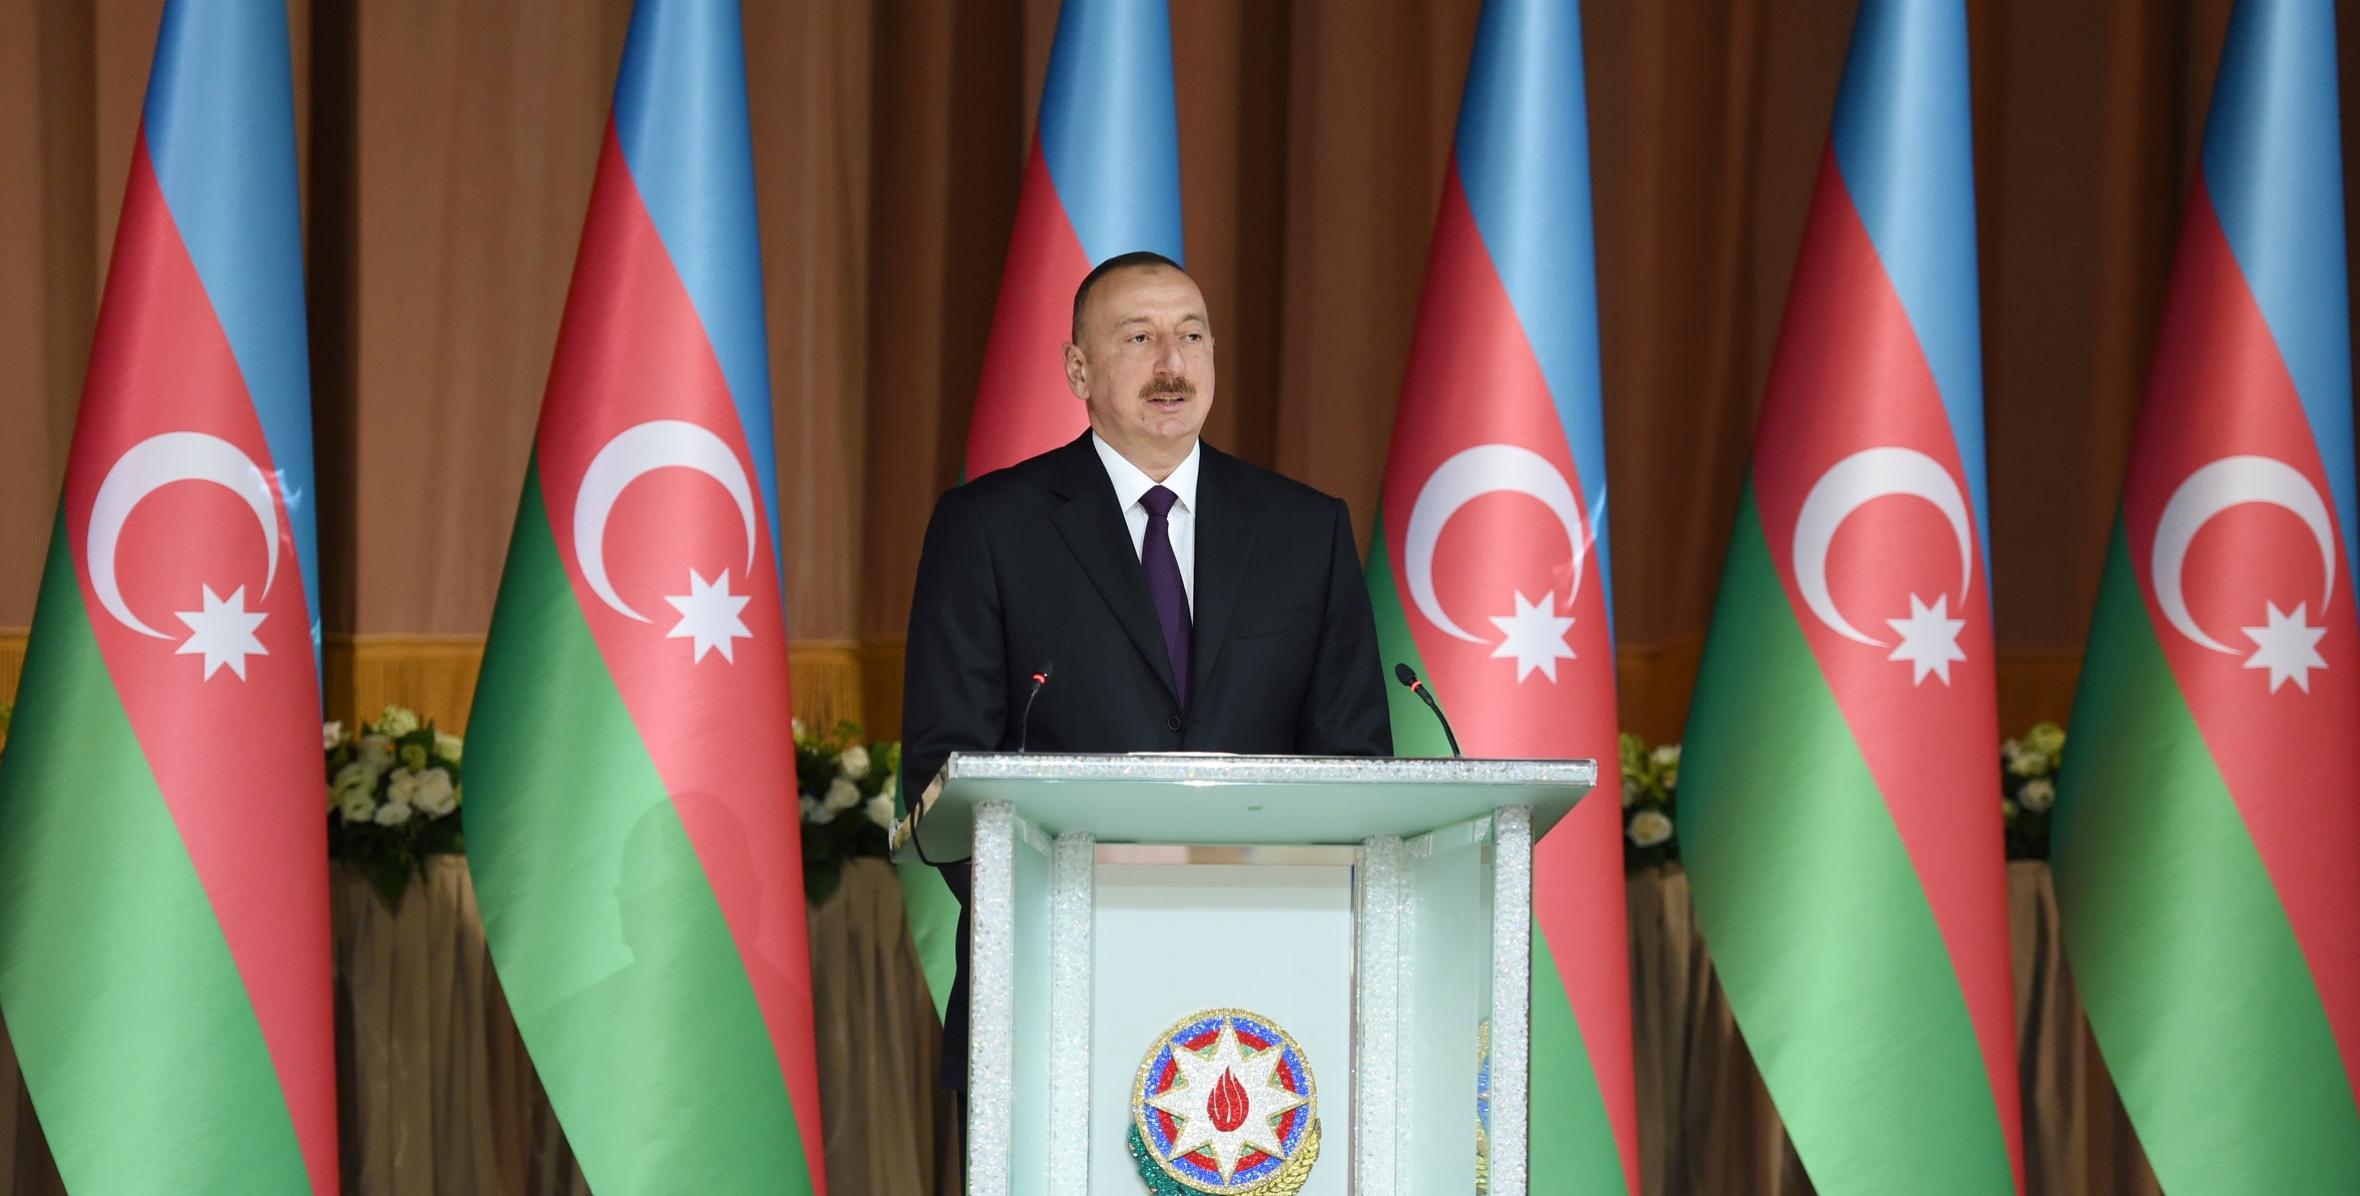 Ilham Aliyev attended official reception on the occasion of Azerbaijan's Republic Day